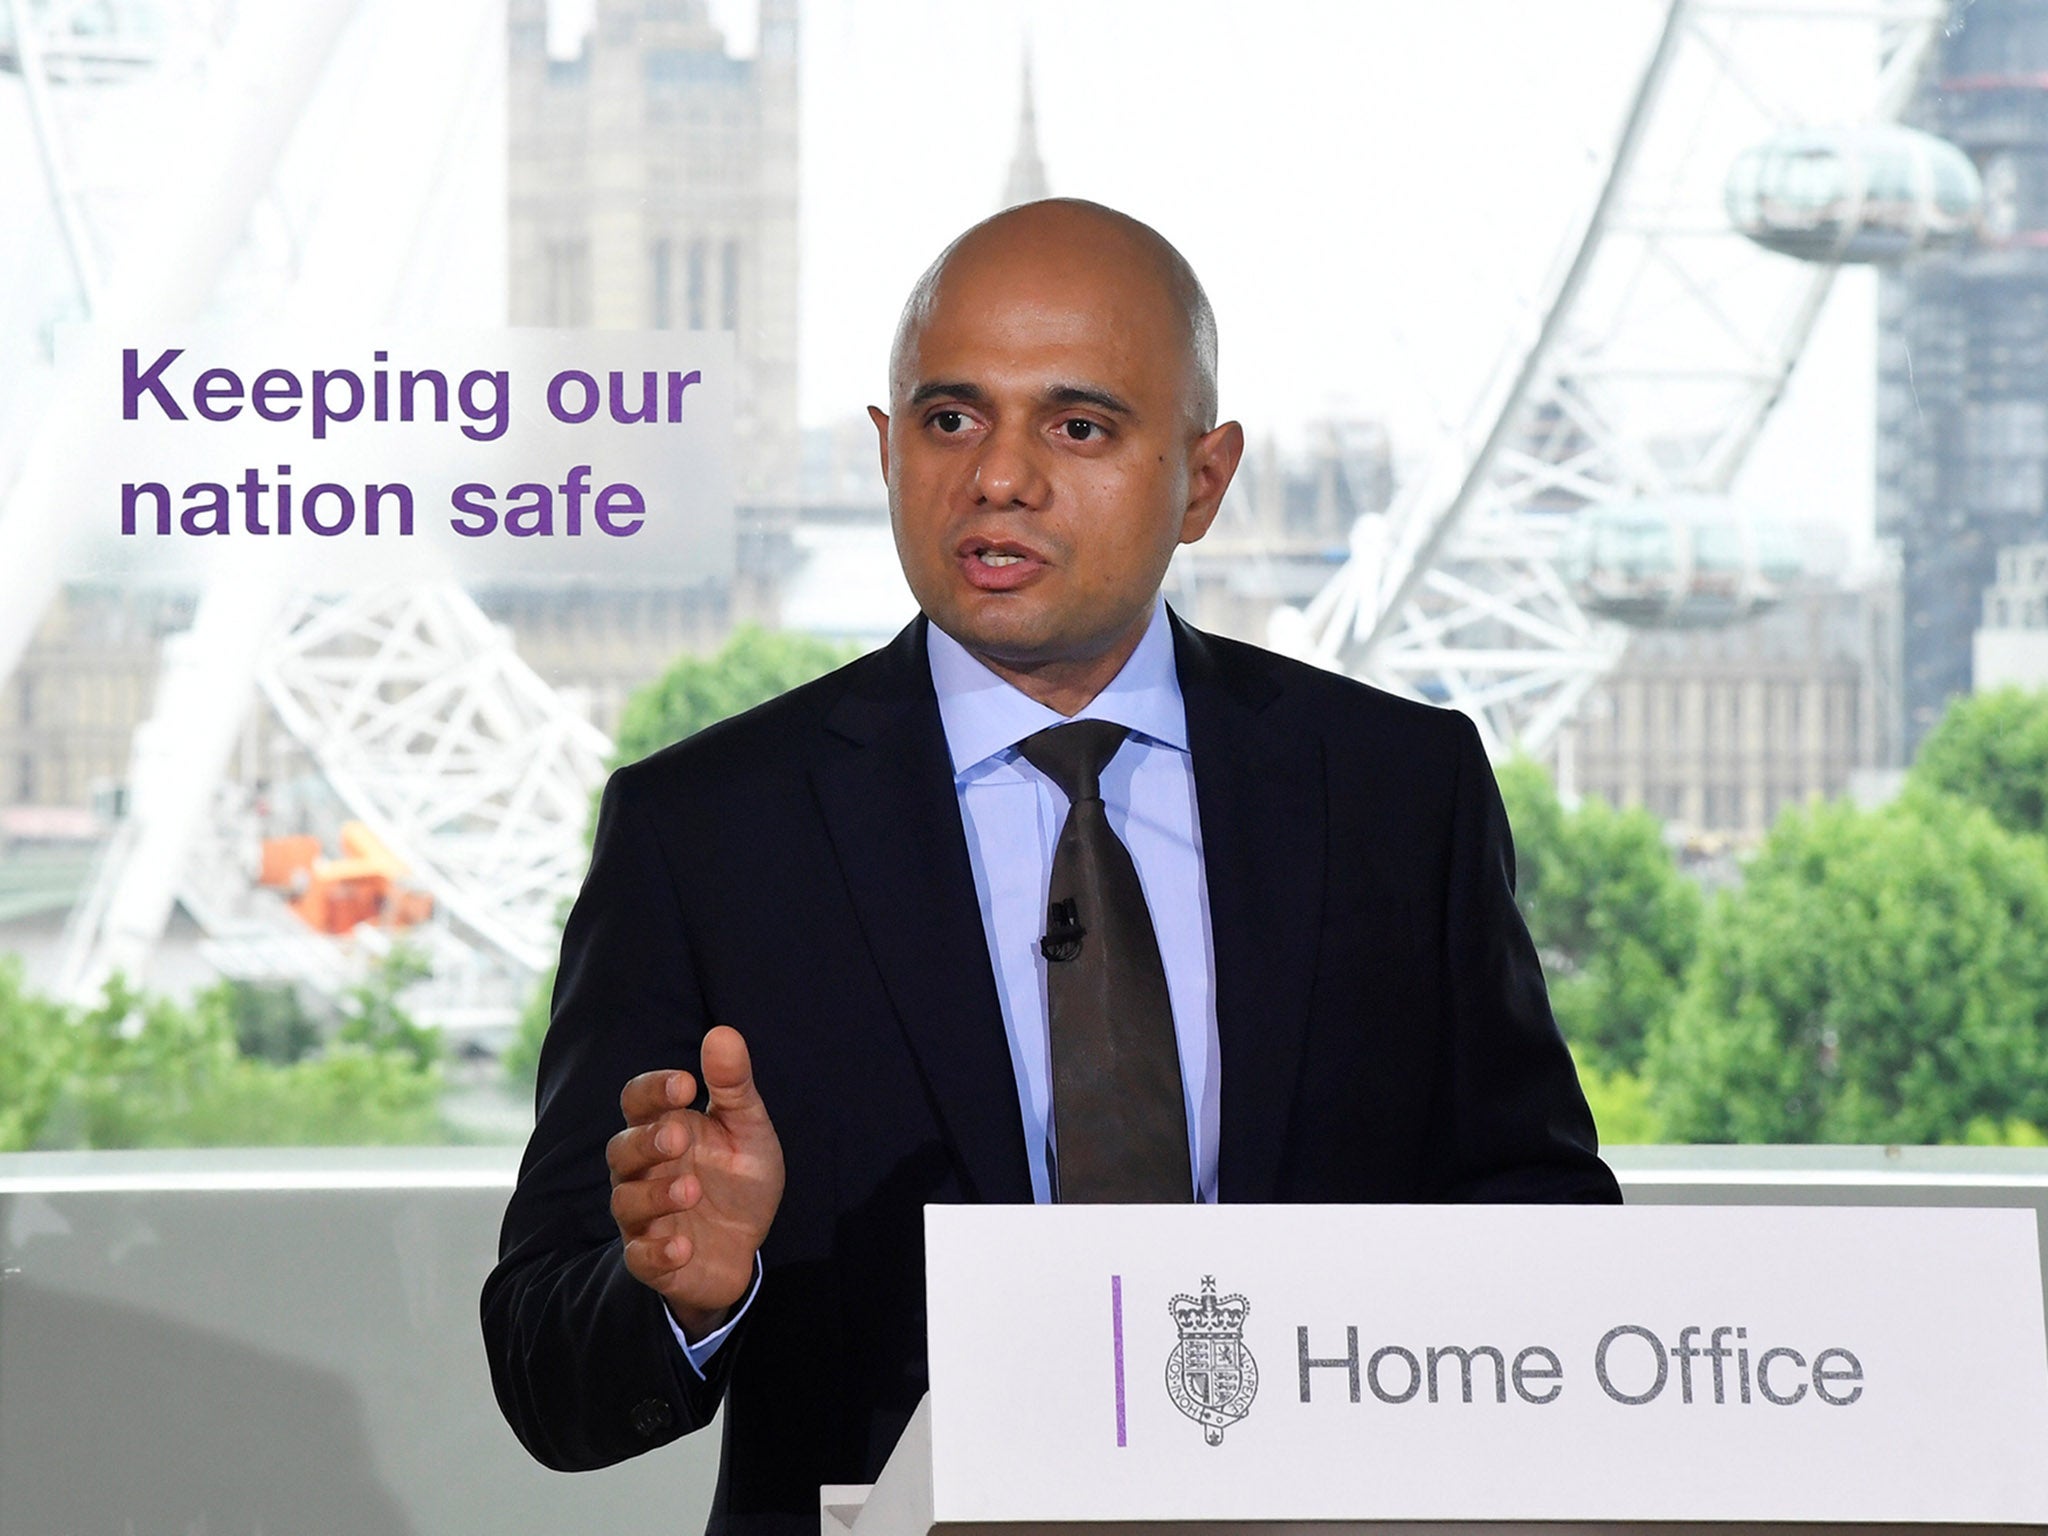 Sajid Javid should respond quickly to this clearly amoral aberration